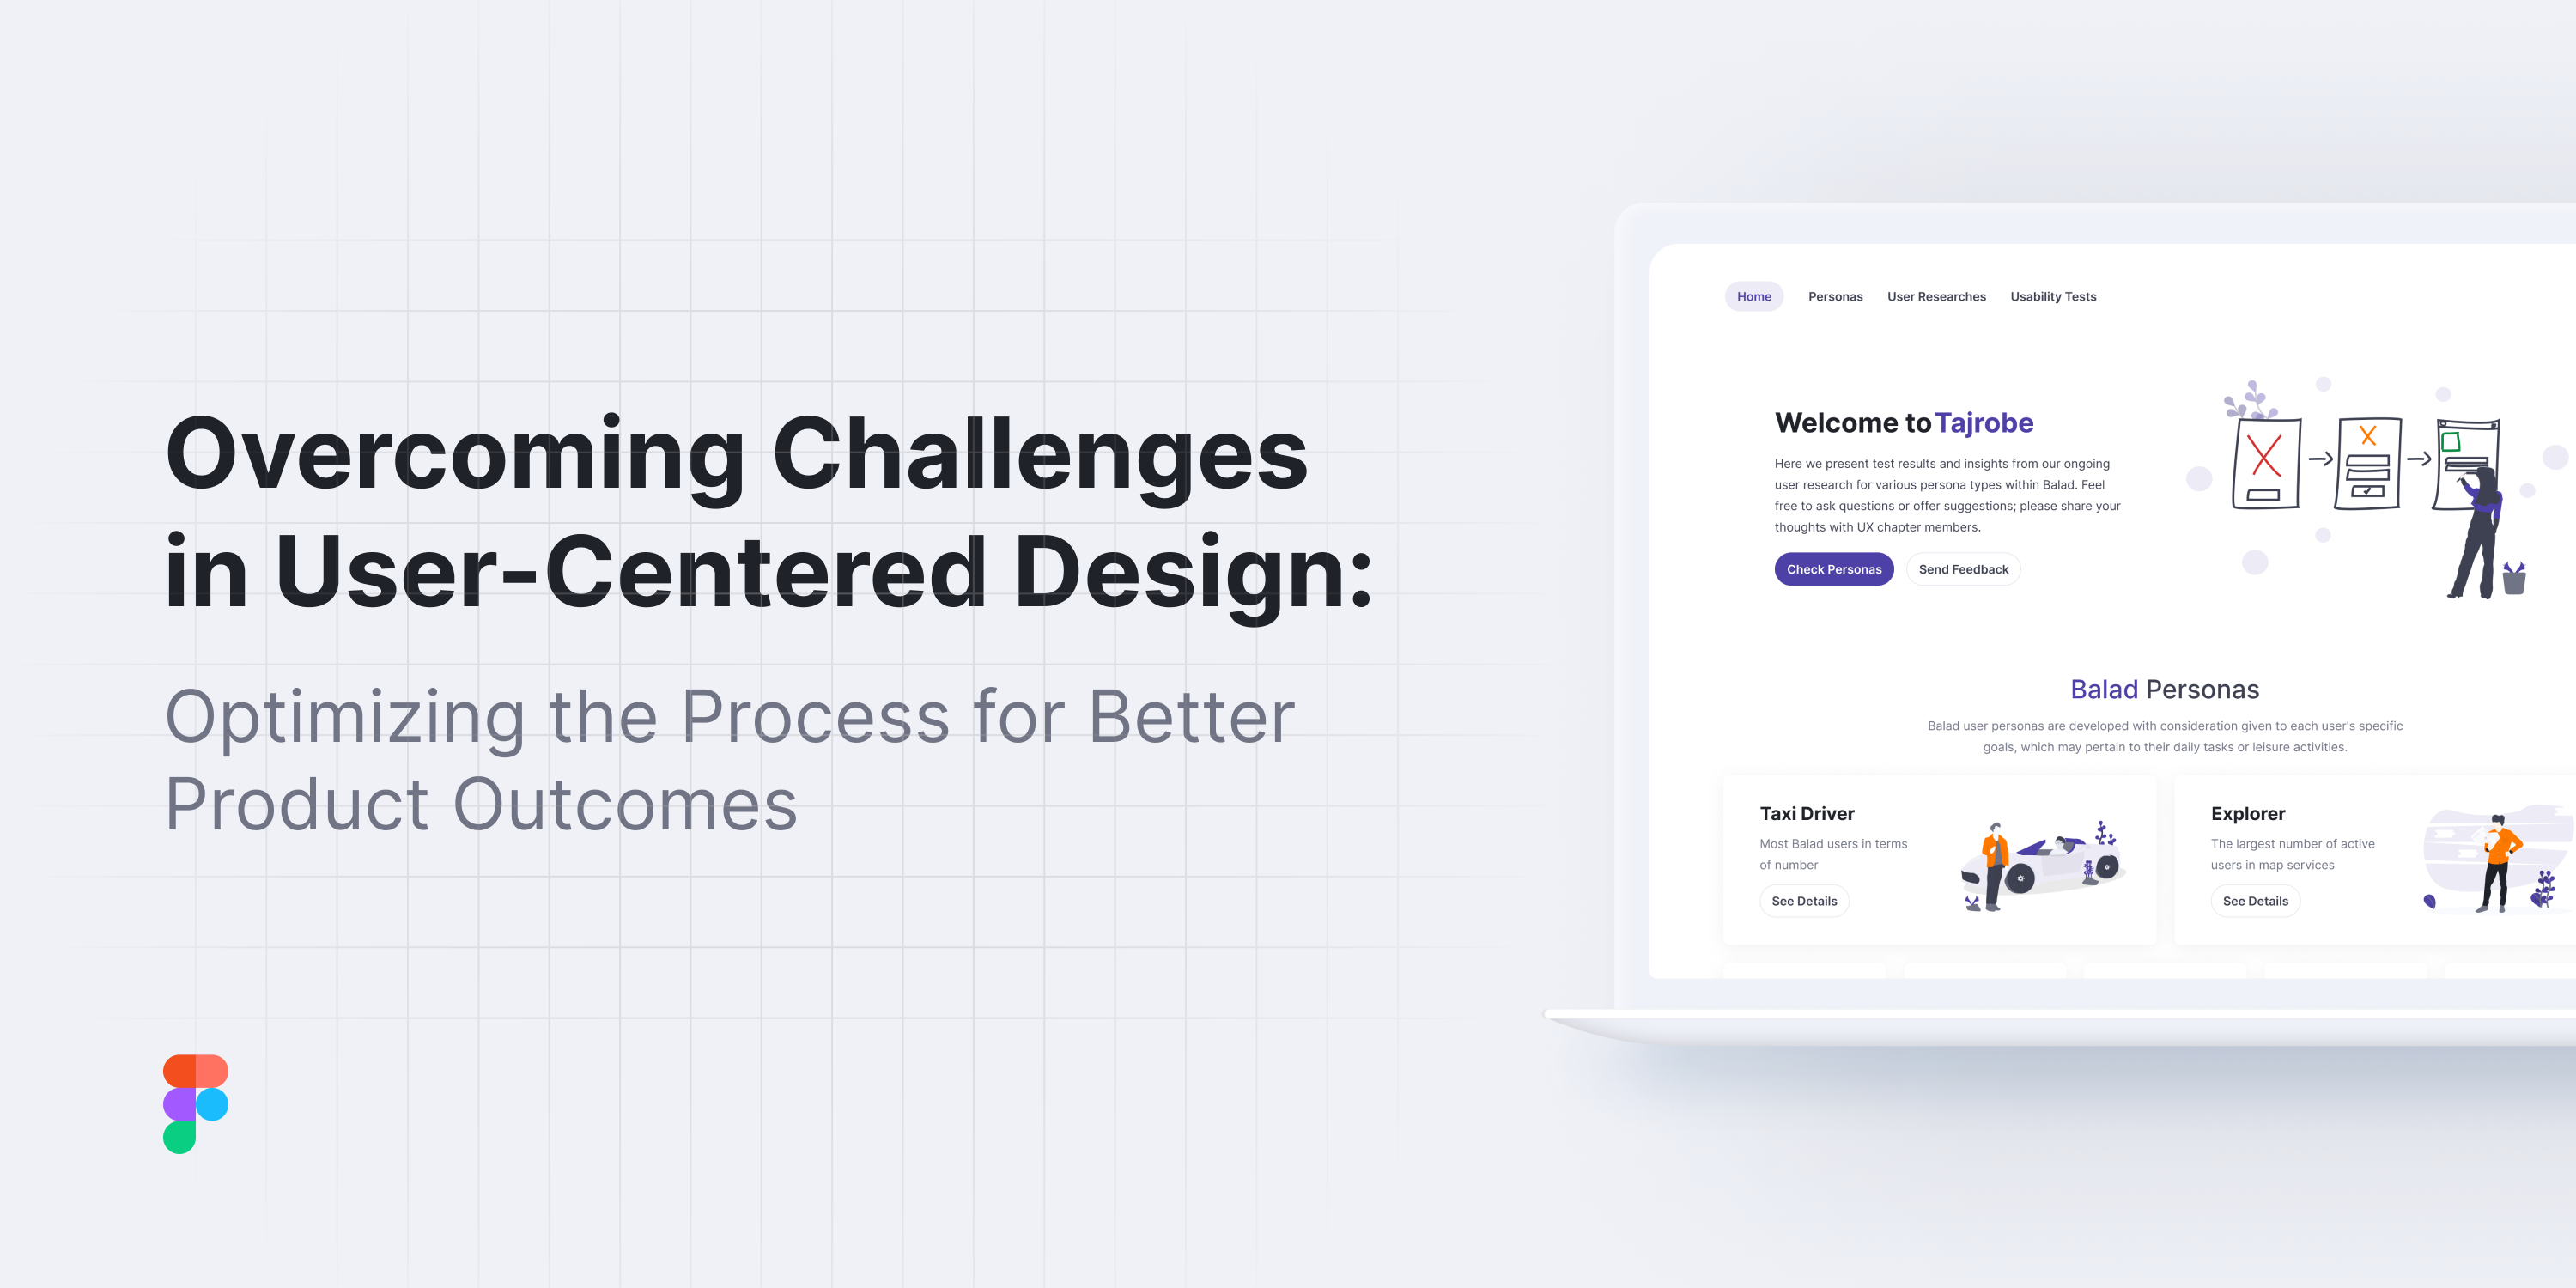 Overcoming Challenges in User-Centered Design: Optimizing the Process for Better Product Outcomes